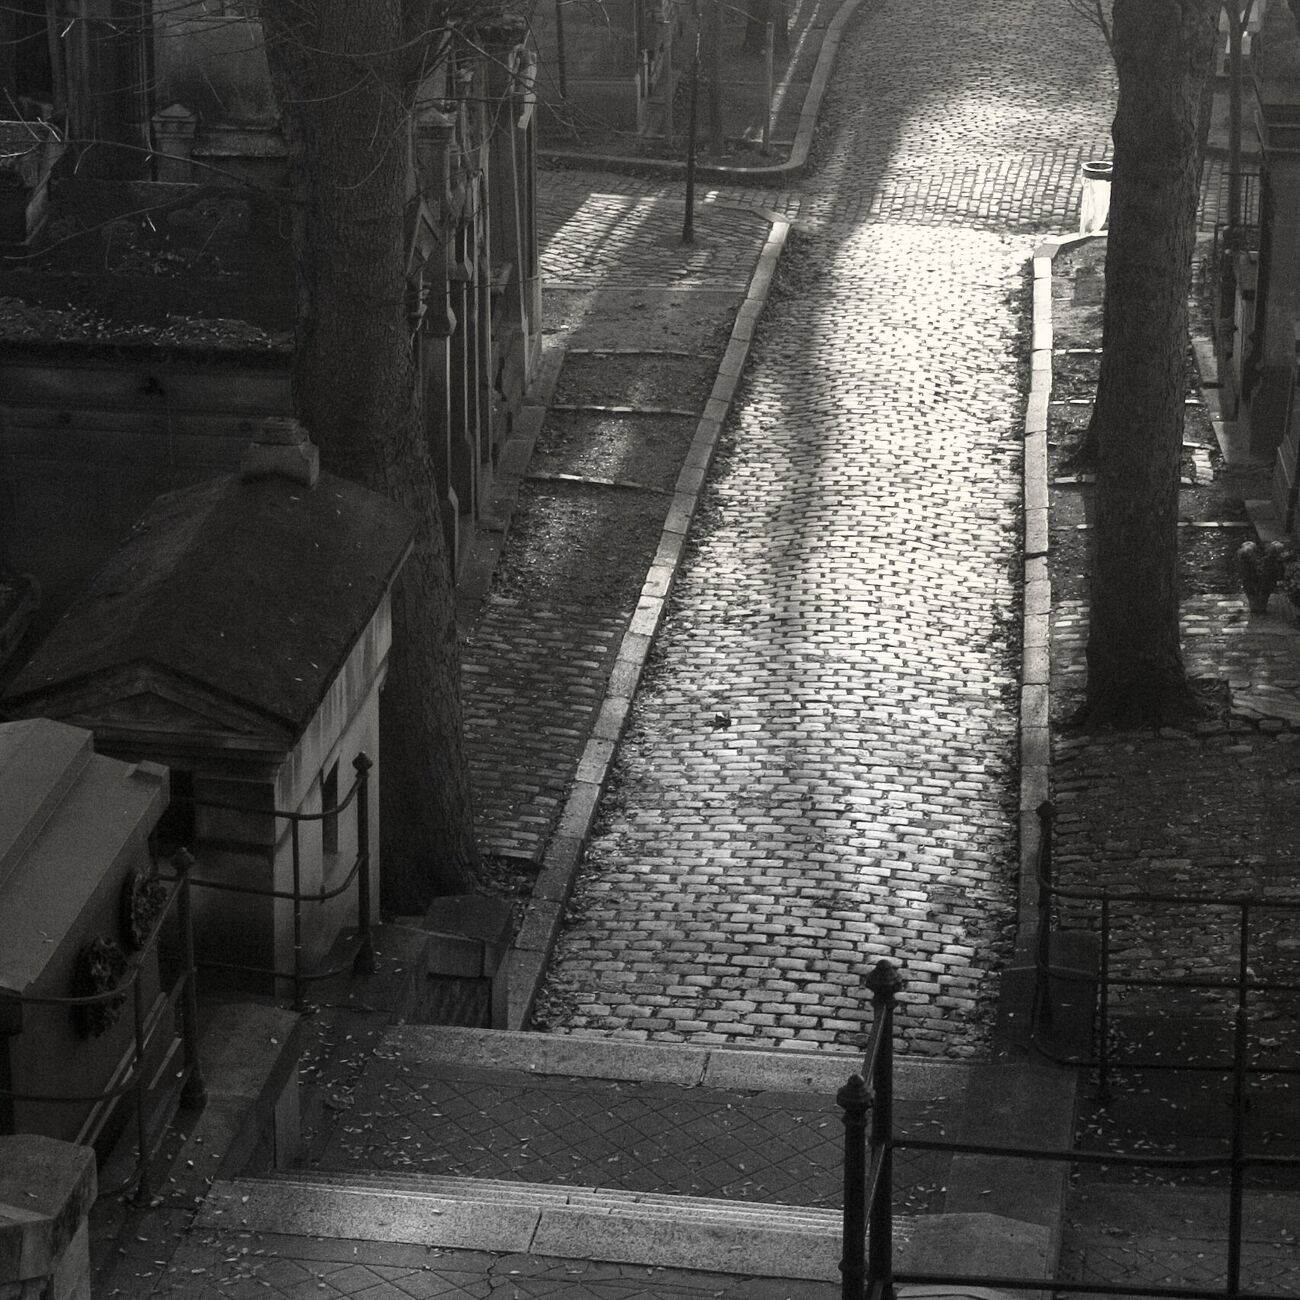 Photograph print 5.1 x 5.1 in, Père Lachaise Cemetary. Ref-485-19 - Denis Olivier Art Photography